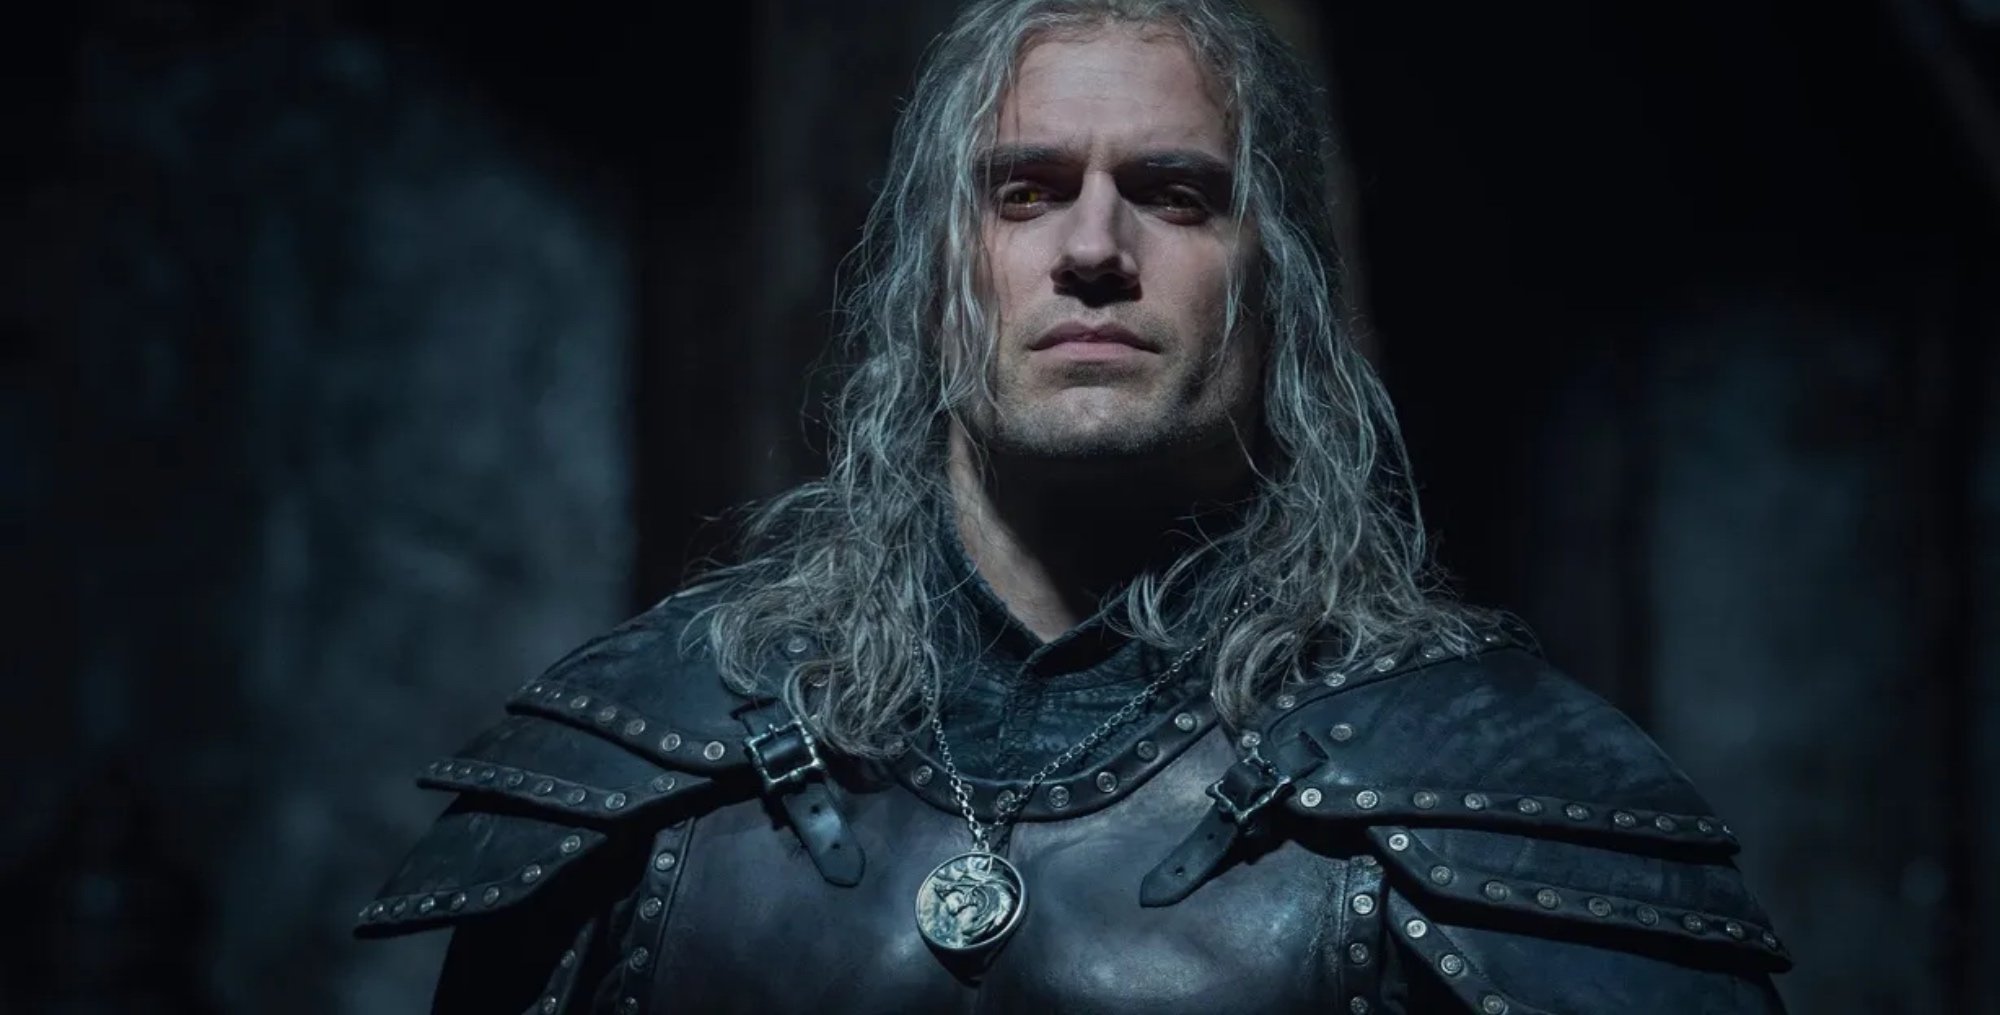 Geralt of Rivia in 'The Witcher' Season 2 wearing battle armor.